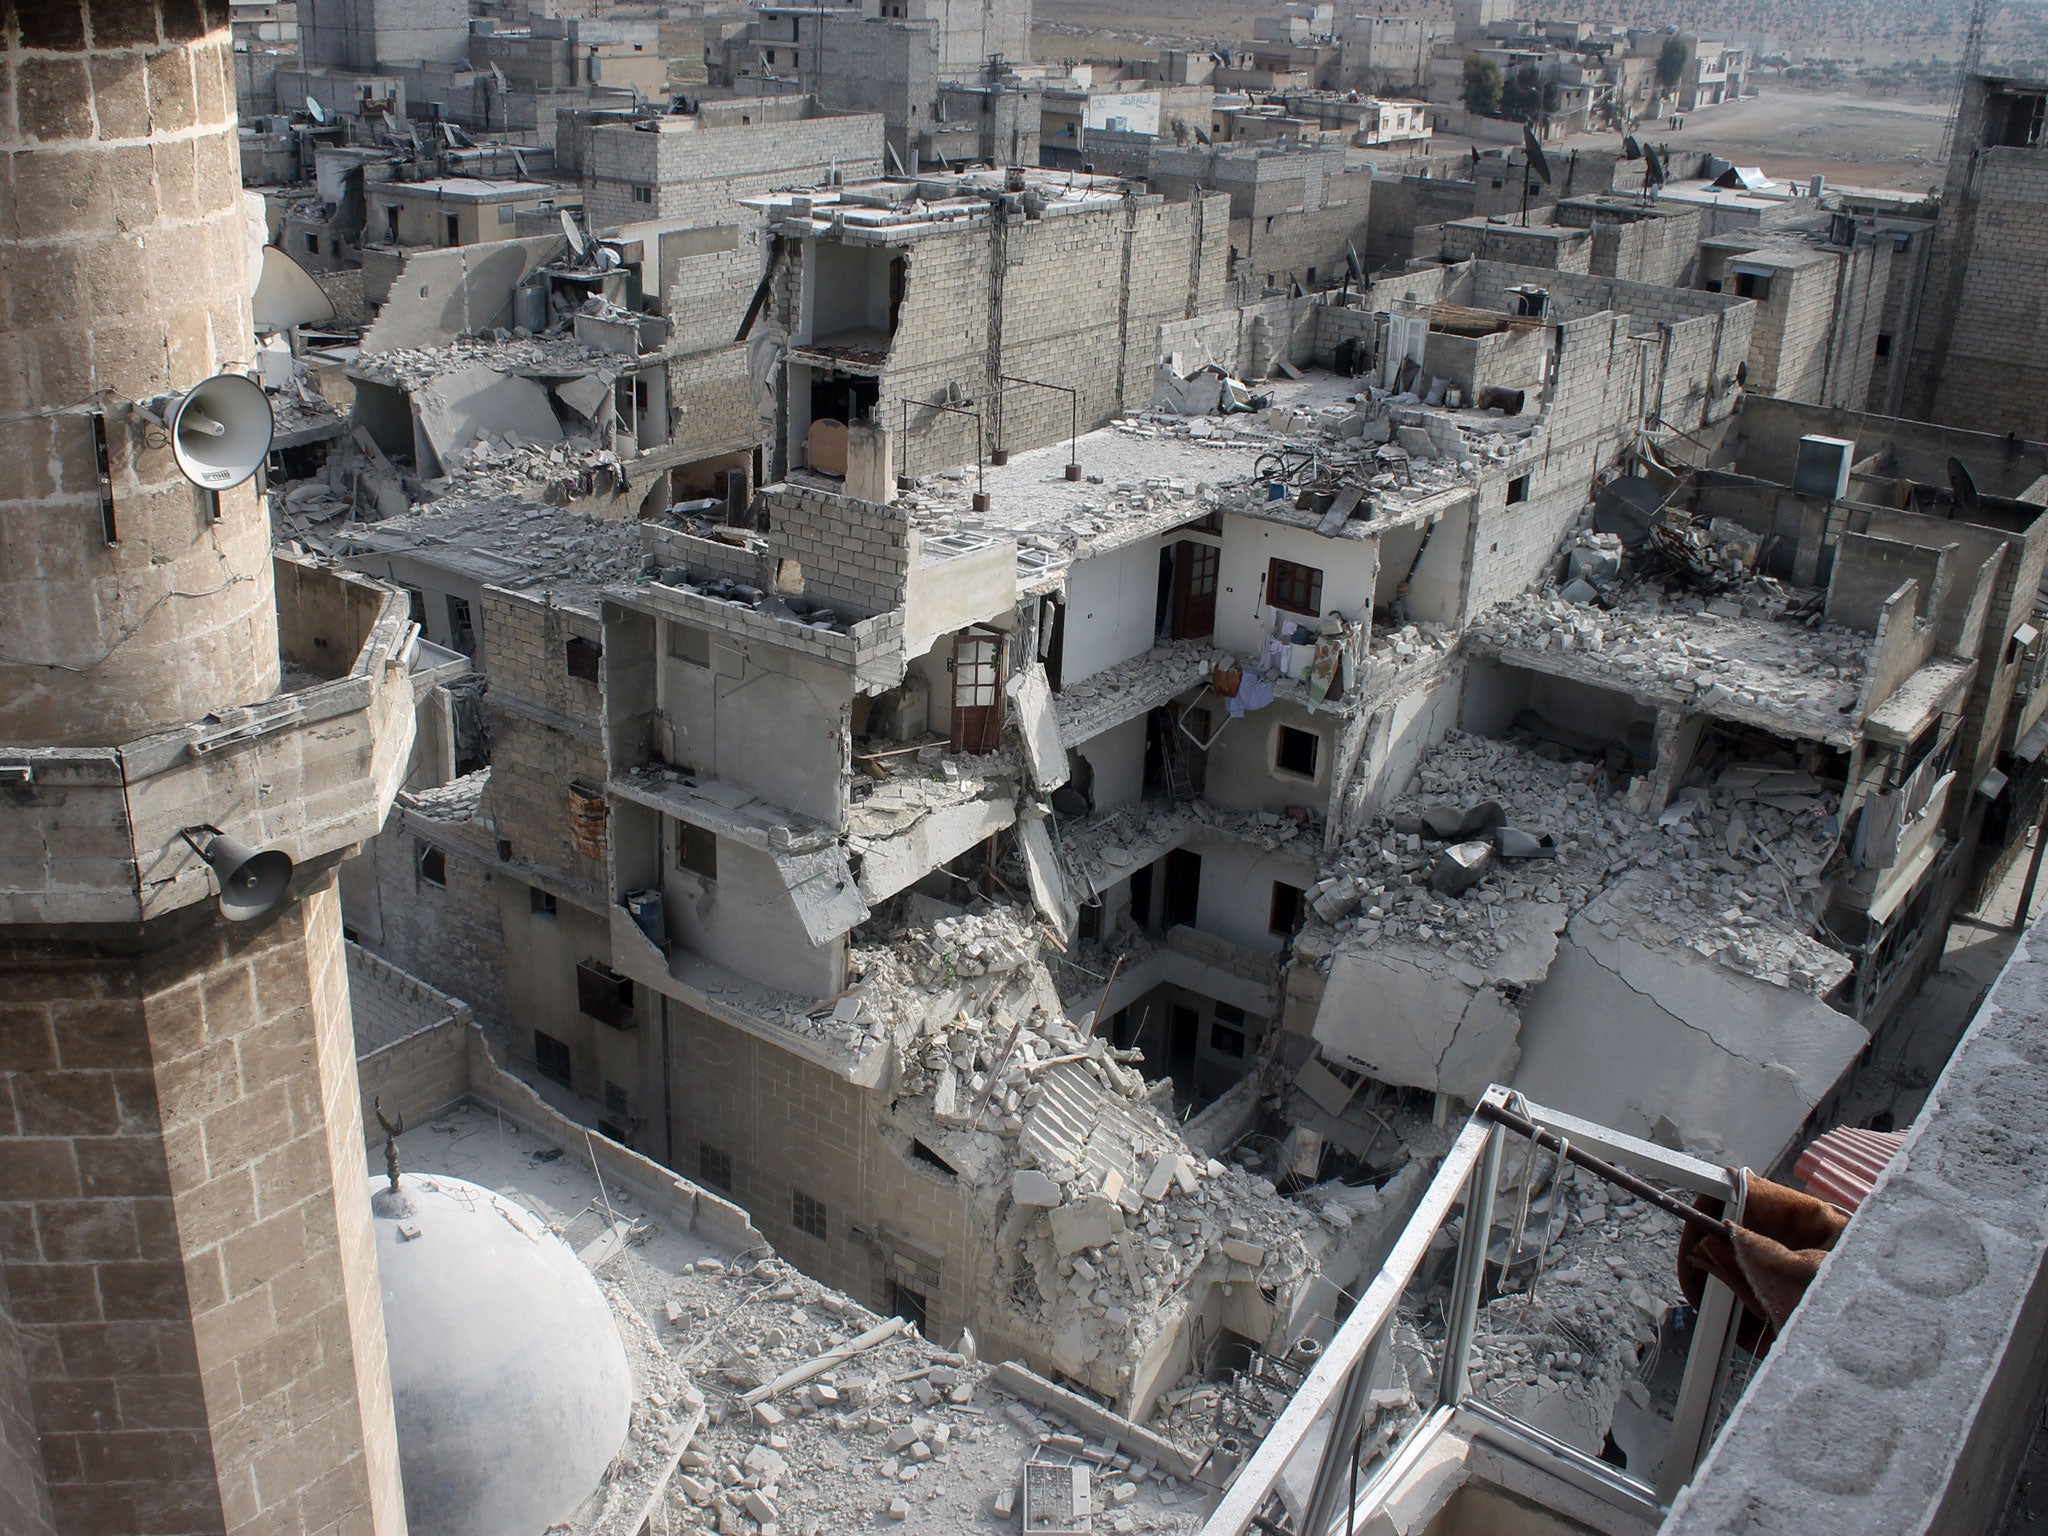 Buildings in Aleppo that fell down following reported air raids by government warplanes (AFP/Getty)